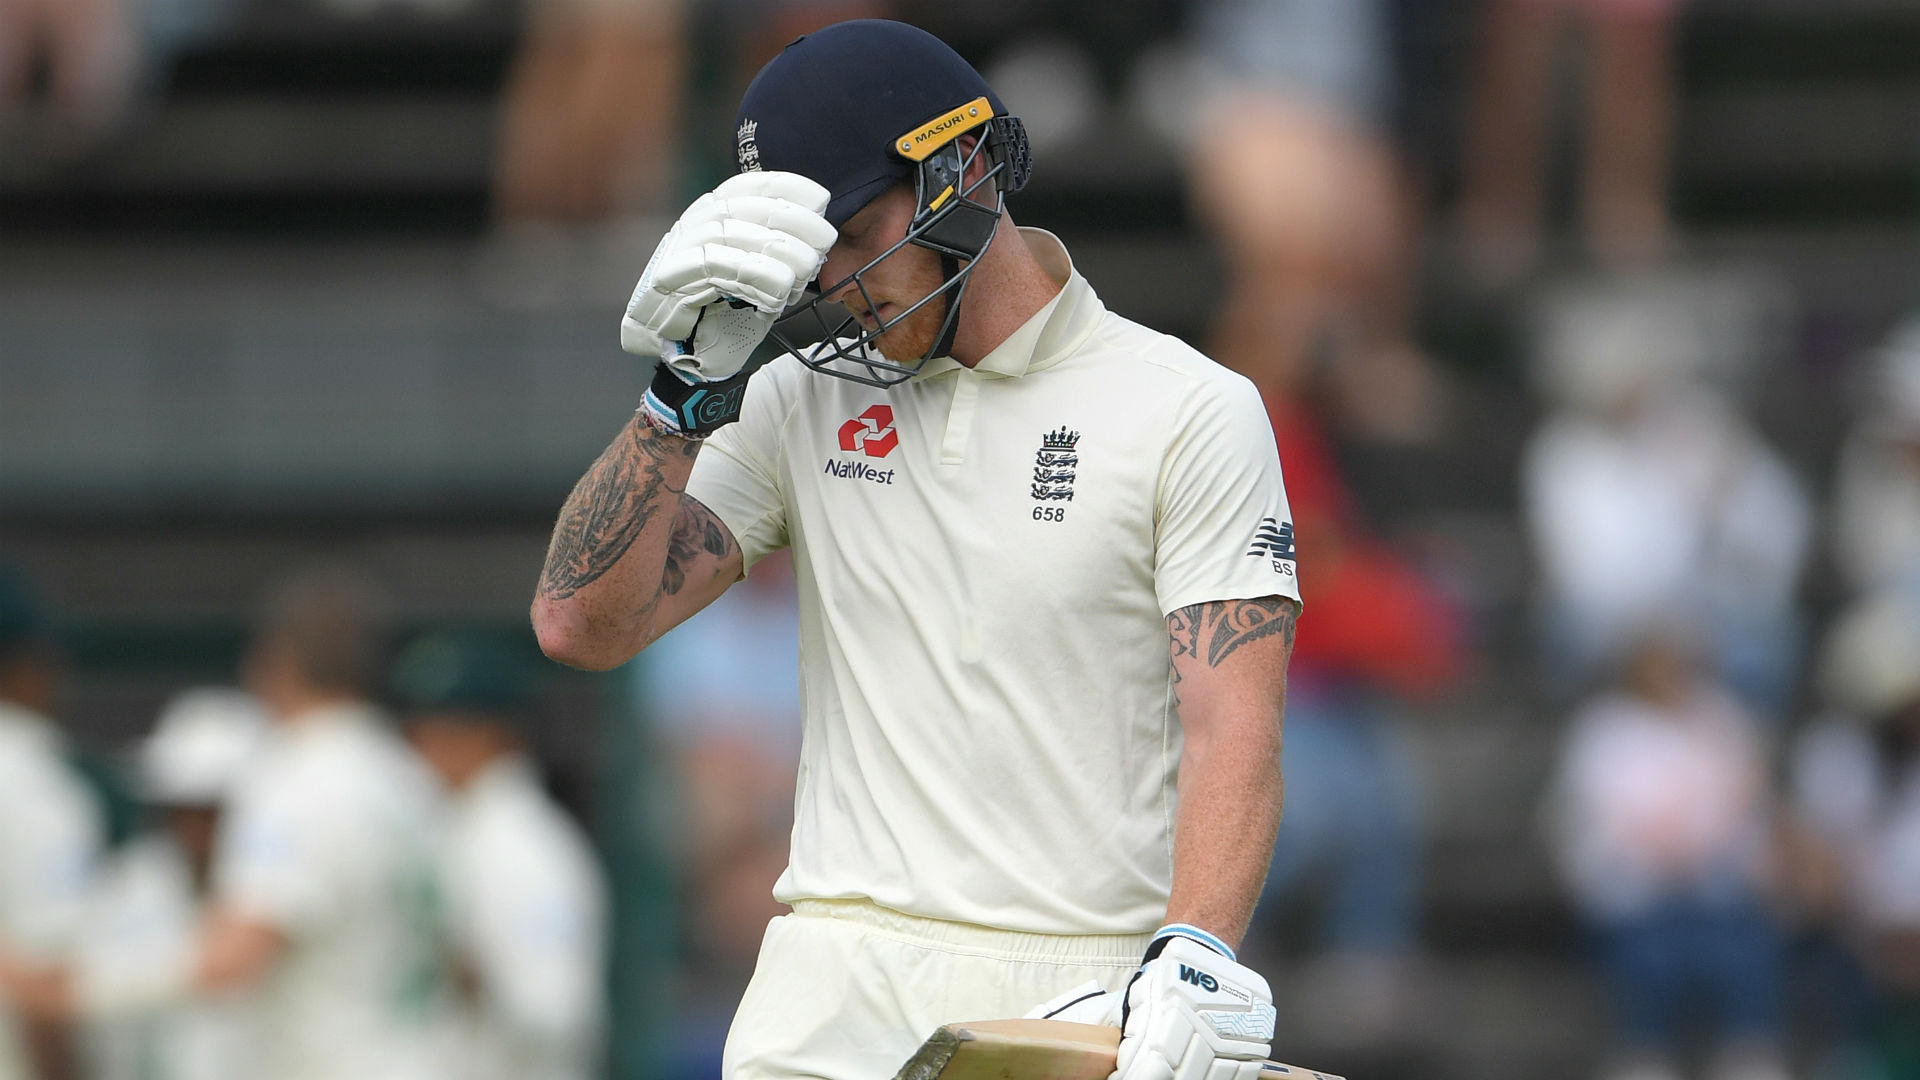 After being heard to use some choice language towards a fan in the crowd, England all-rounder Ben Stokes has apologised.